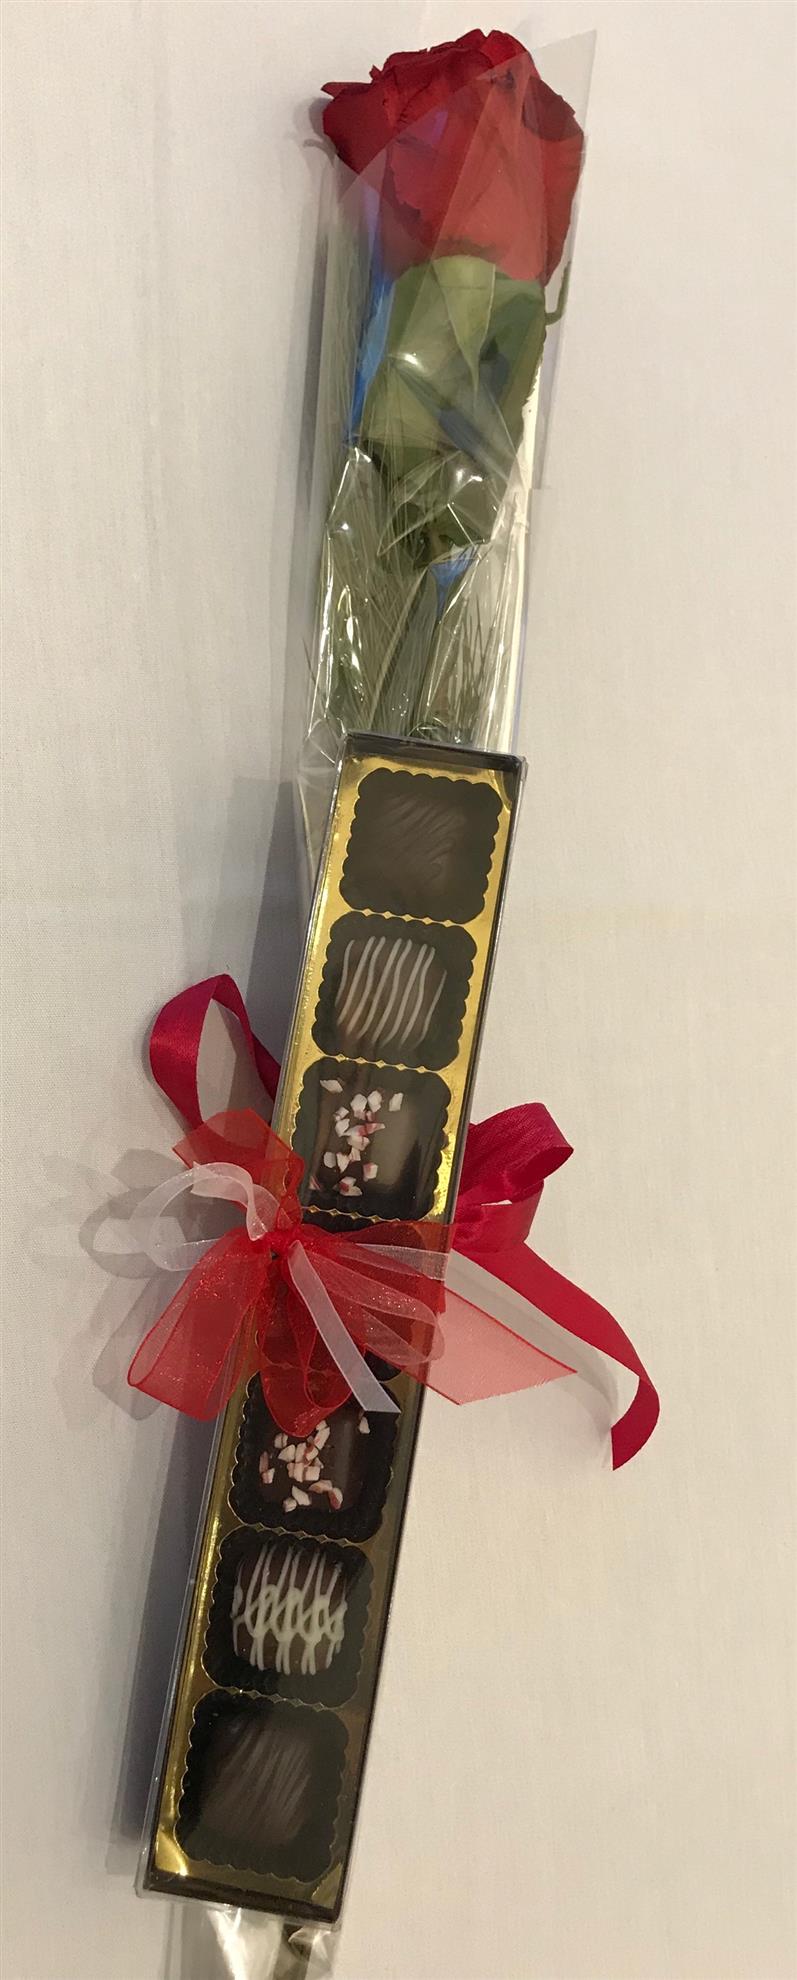 A single red rose with a box of gourmet hand-made chocolates tied with a ribbon.